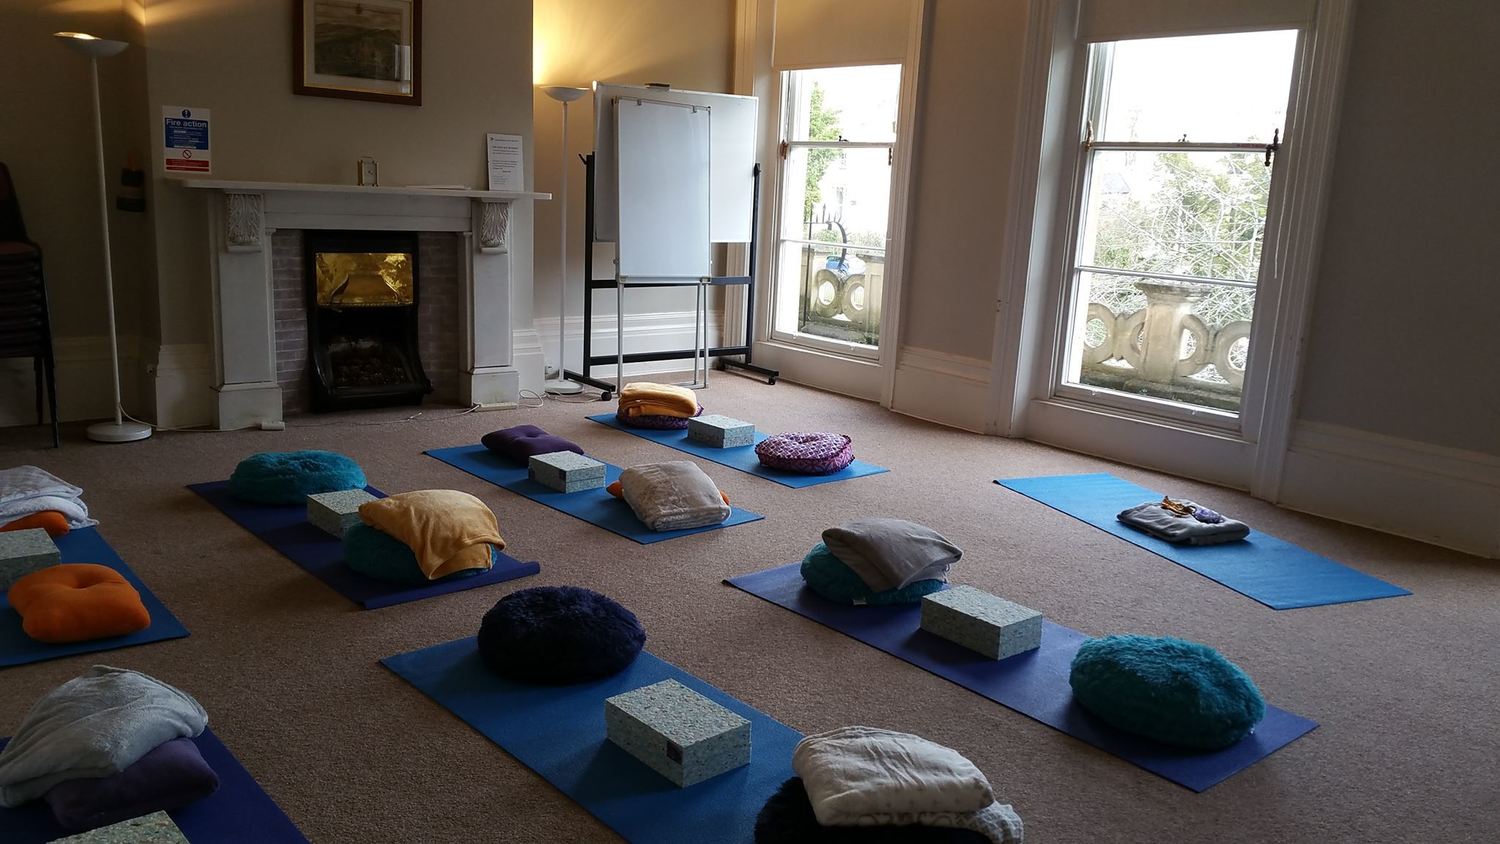 Gallery Photo of Mindfulness Retreat Day at Parmoor House